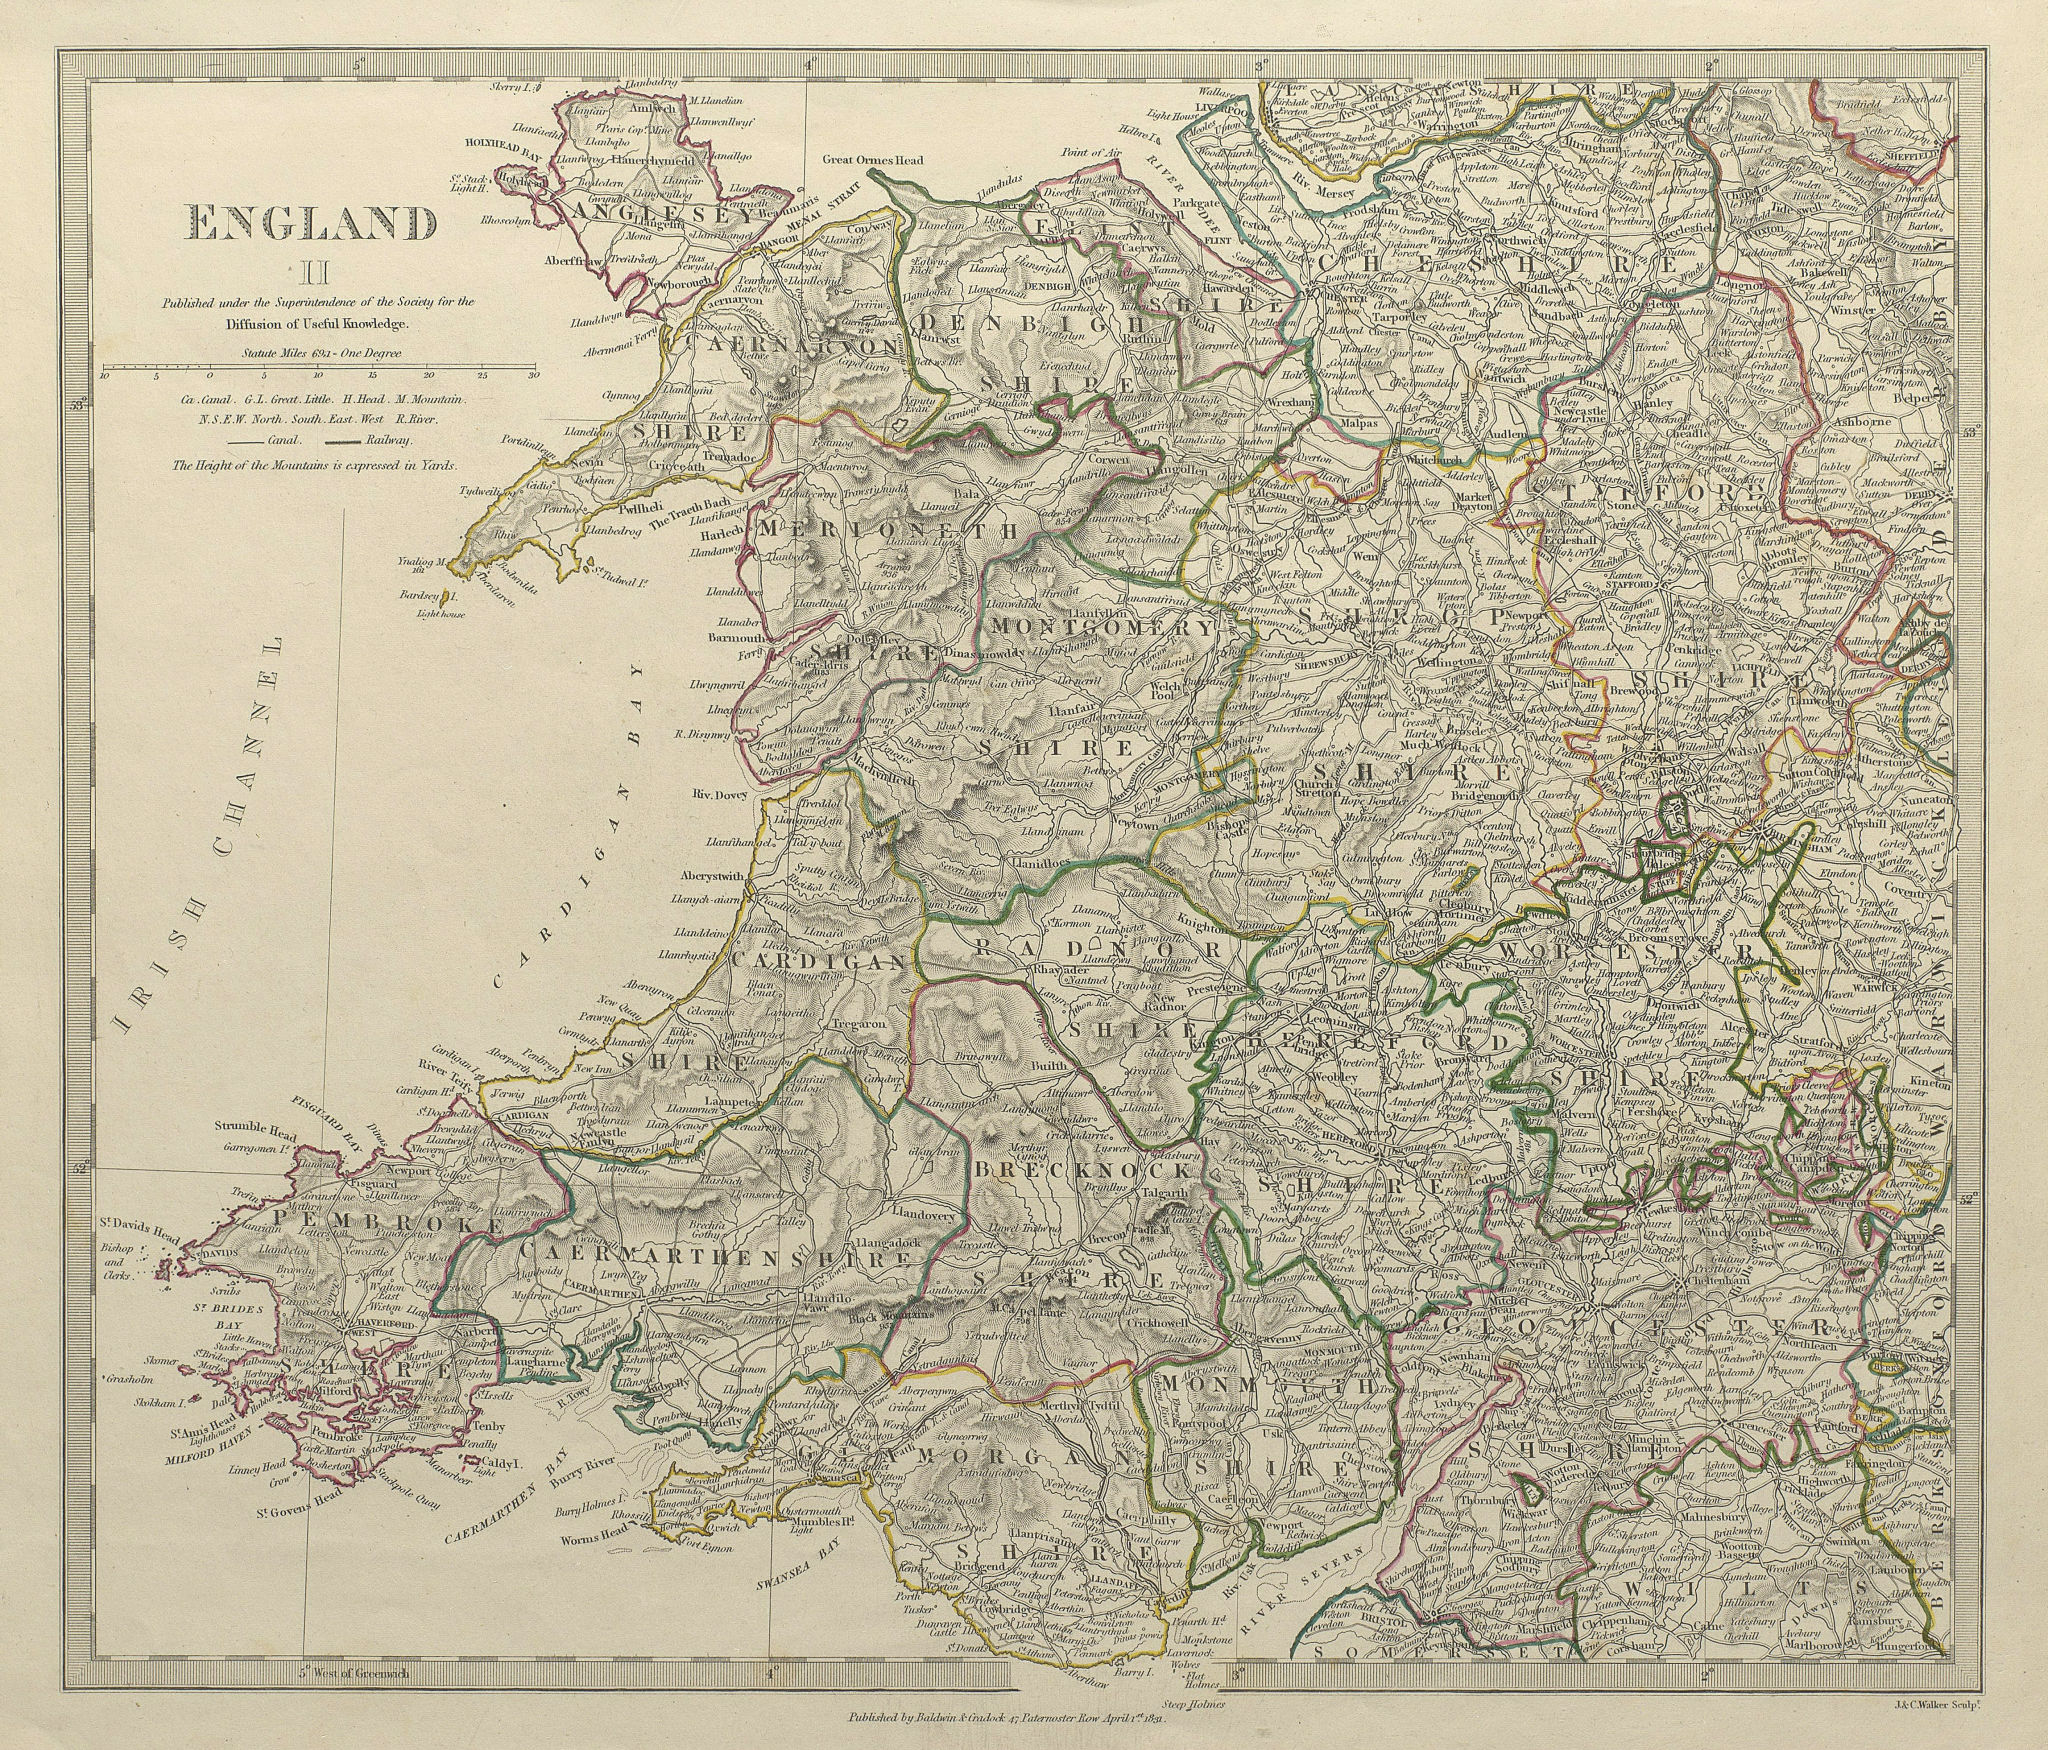 Associate Product WALES & ENGLAND WEST MIDLANDS. Showing counties. Original colour.SDUK 1844 map